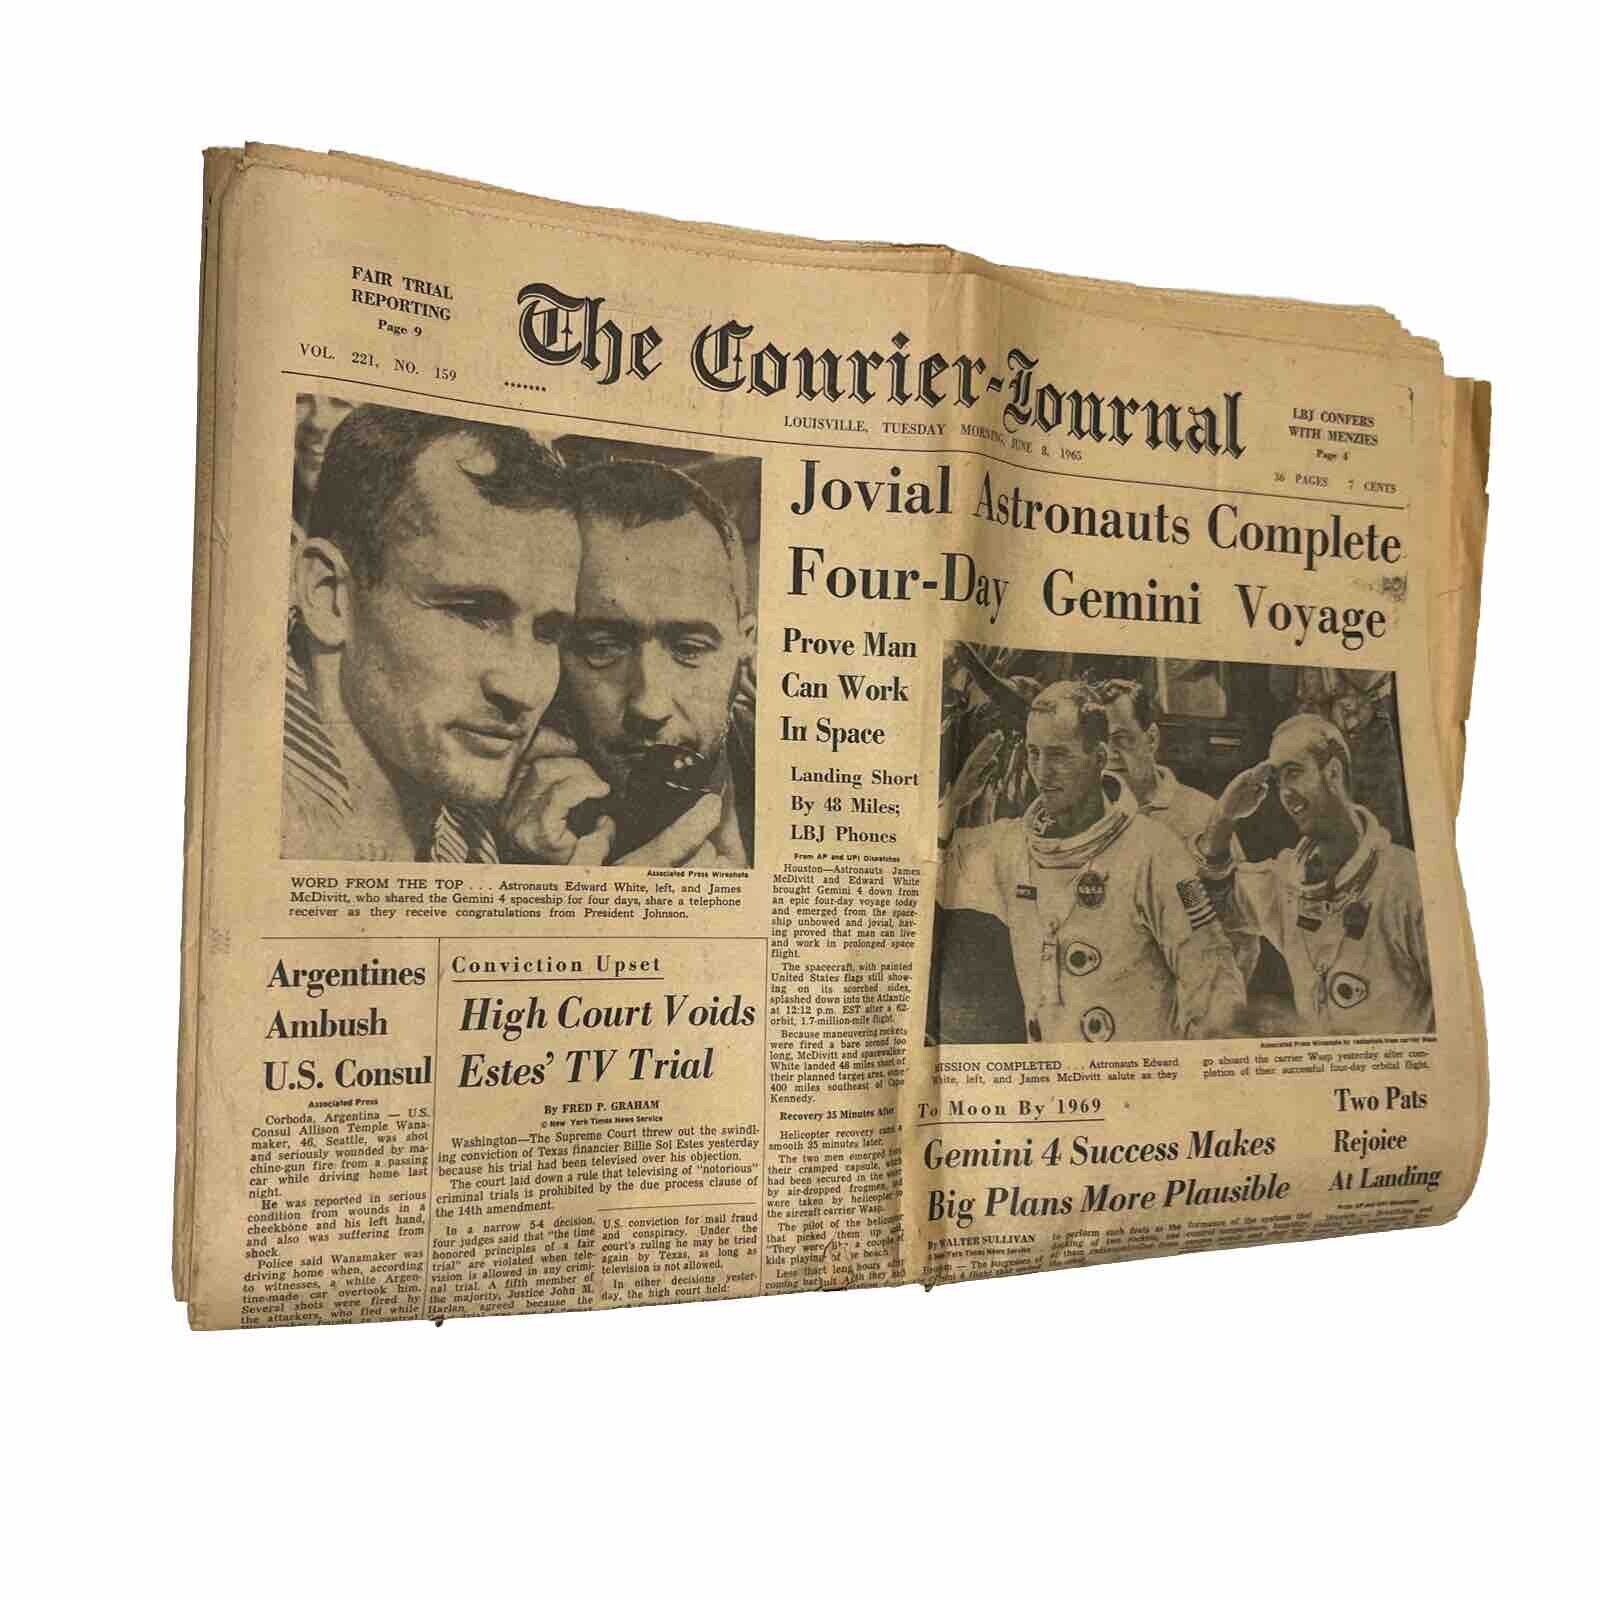 1965 JUNE 8 THE COURIER JOURNAL NEWSPAPER - GEMINI 4 BACK FROM SPACE - (W)